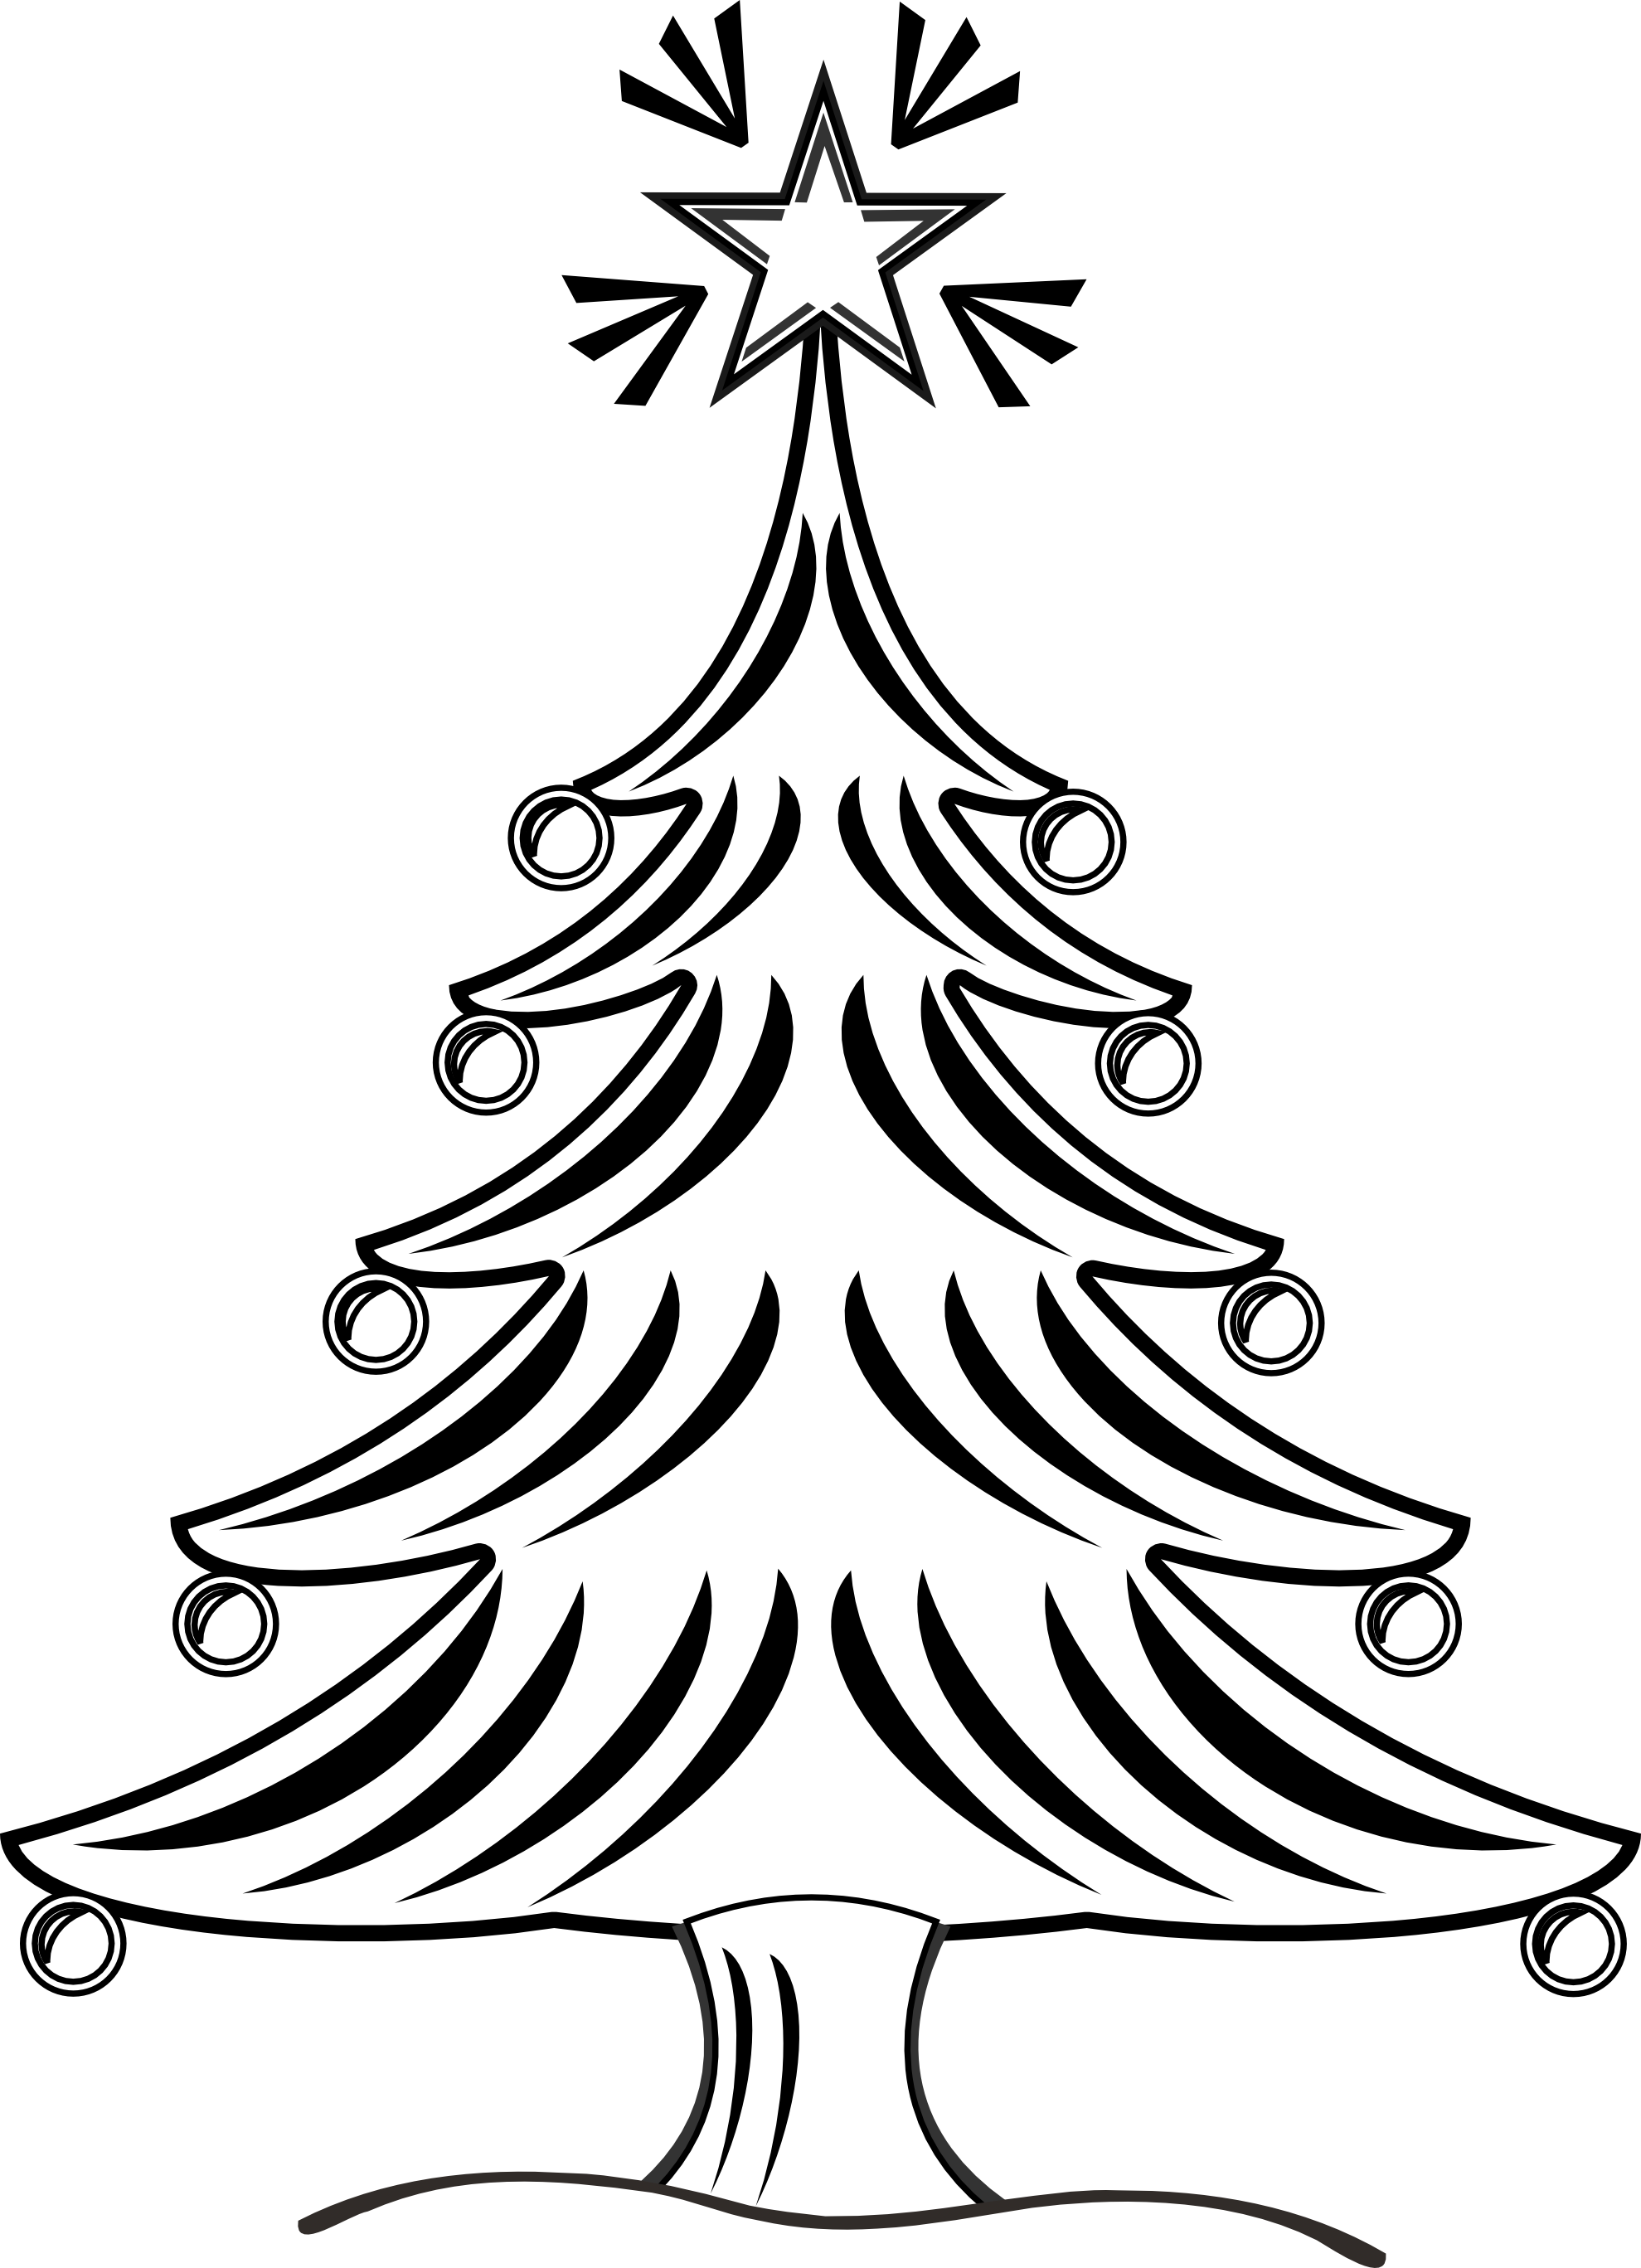 Free Black And White Tree Images, Download Free Black And White Tree